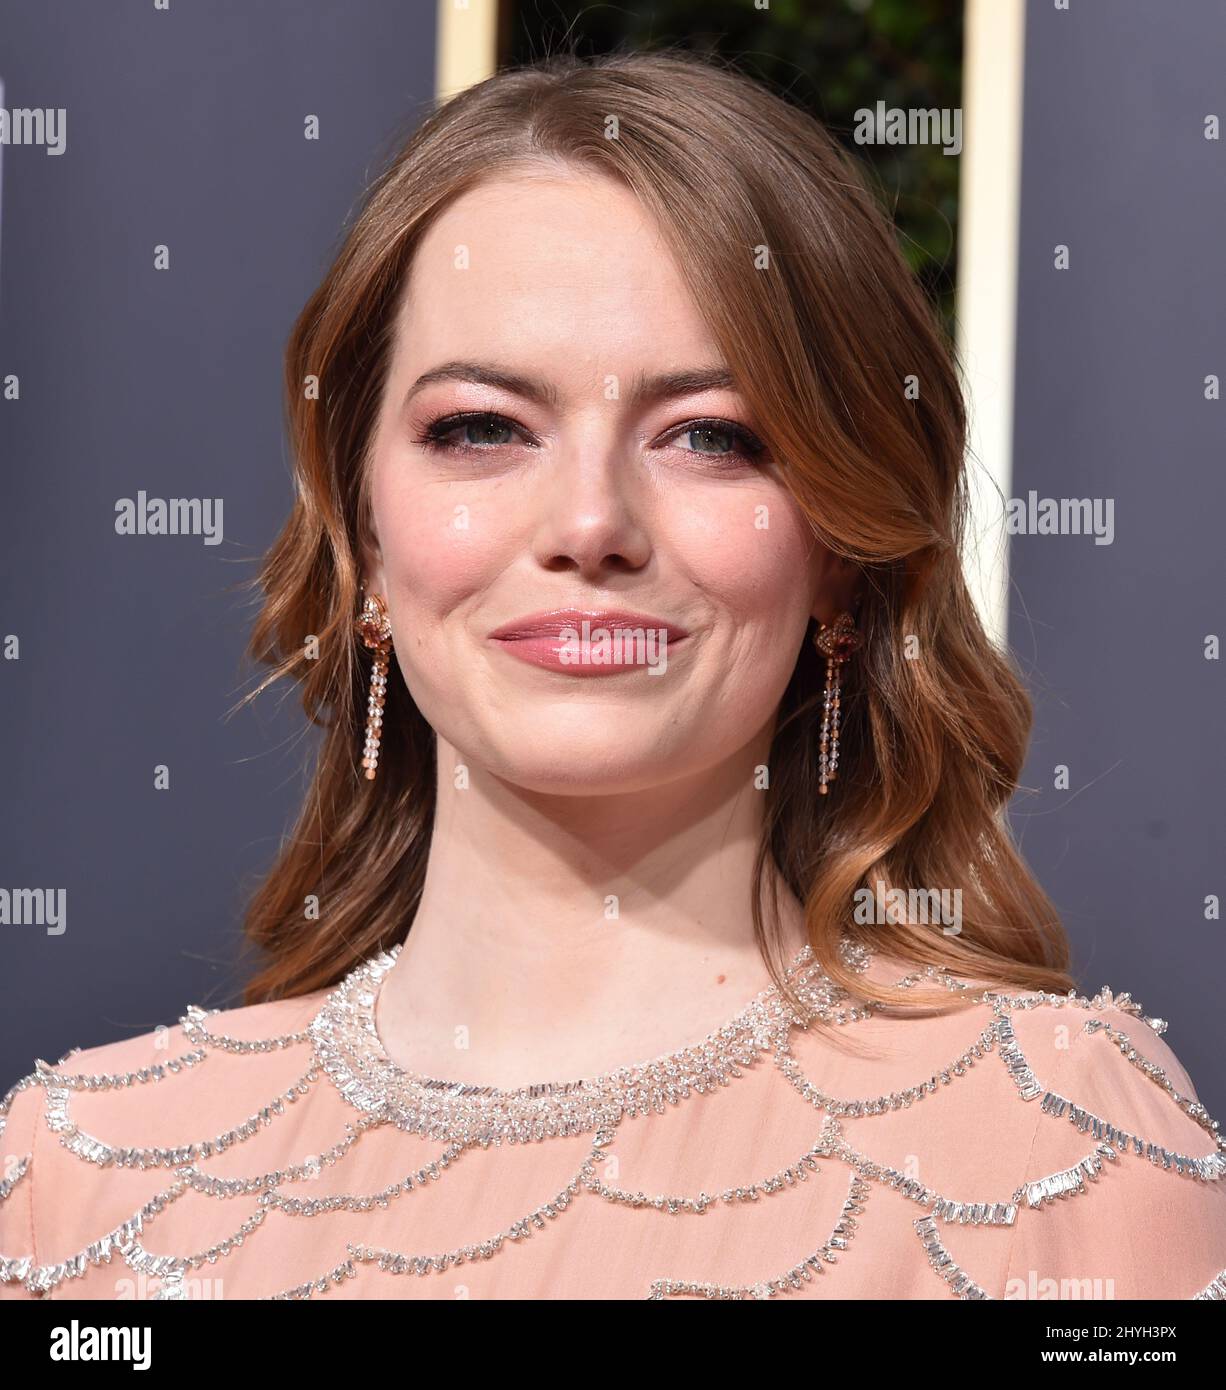 Emma Stone attends the Louis Vuitton Cruise Collection fashion show, held  at the Fondation Maeght in Saint-Paul-de-Vence, south of France, on May 28,  2018. Photo by Marco Piovanotto/ABACAPRESS.COM Stock Photo - Alamy